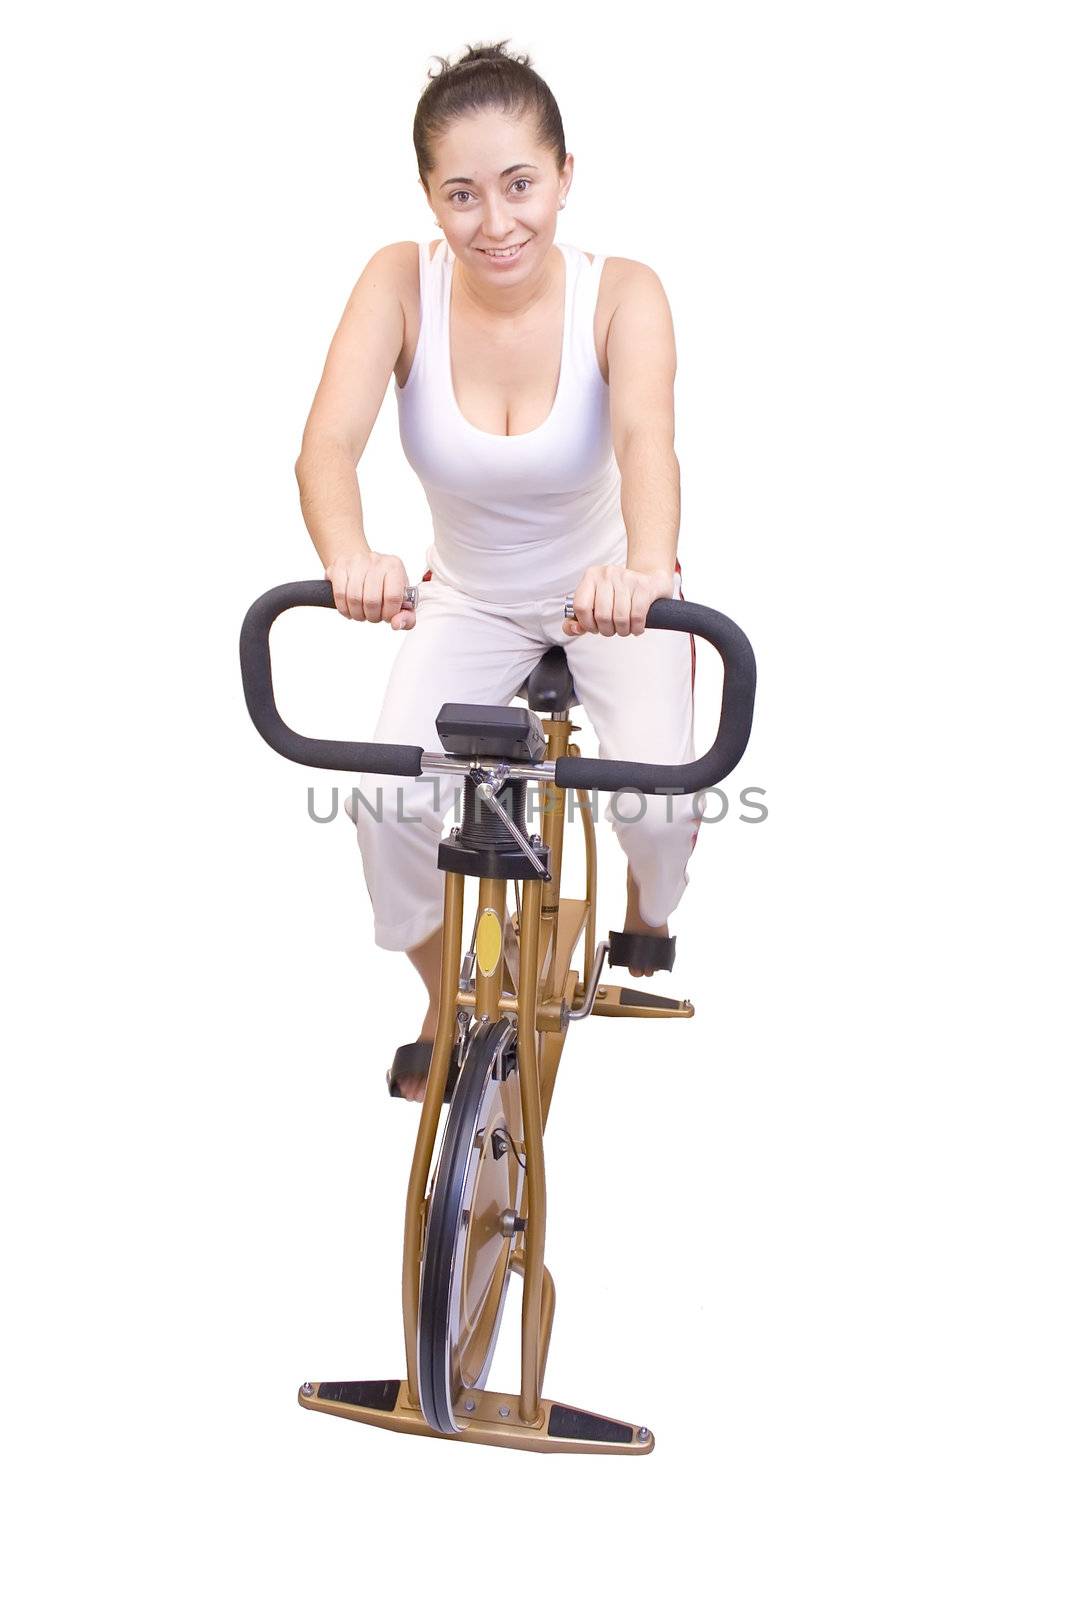 Young woman on exercise bike